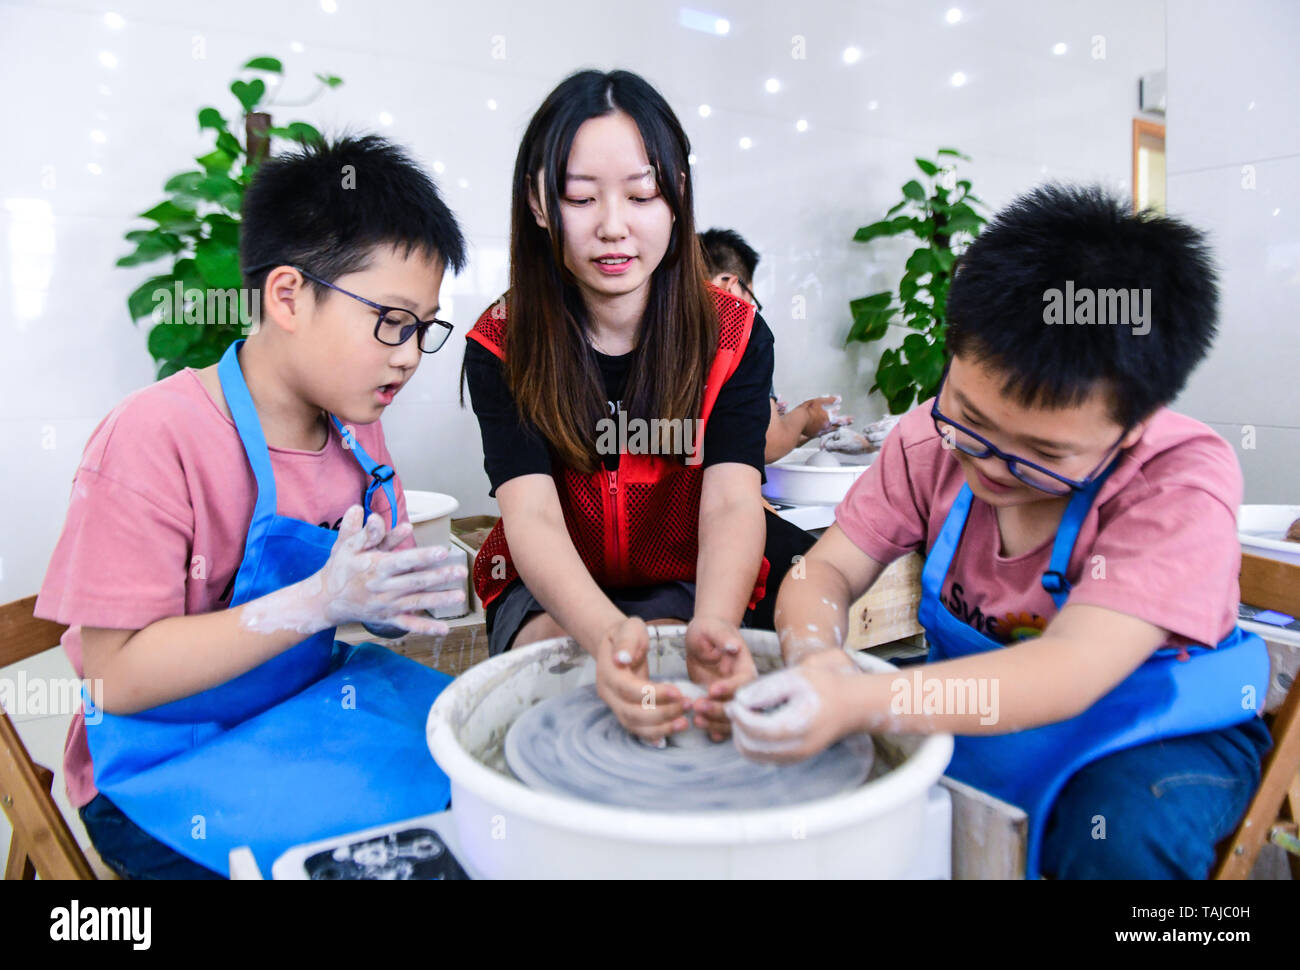 Cixi, China's Zhejiang Province. 25th May, 2019. Pupils make pottery wares under the instruction of a volunteer in Cixi City, east China's Zhejiang Province, May 25, 2019. A volunteer center in Cixi City opened a pottery class for local pupils in celebration of the upcoming International Children's Day. Credit: Xu Yu/Xinhua/Alamy Live News Stock Photo